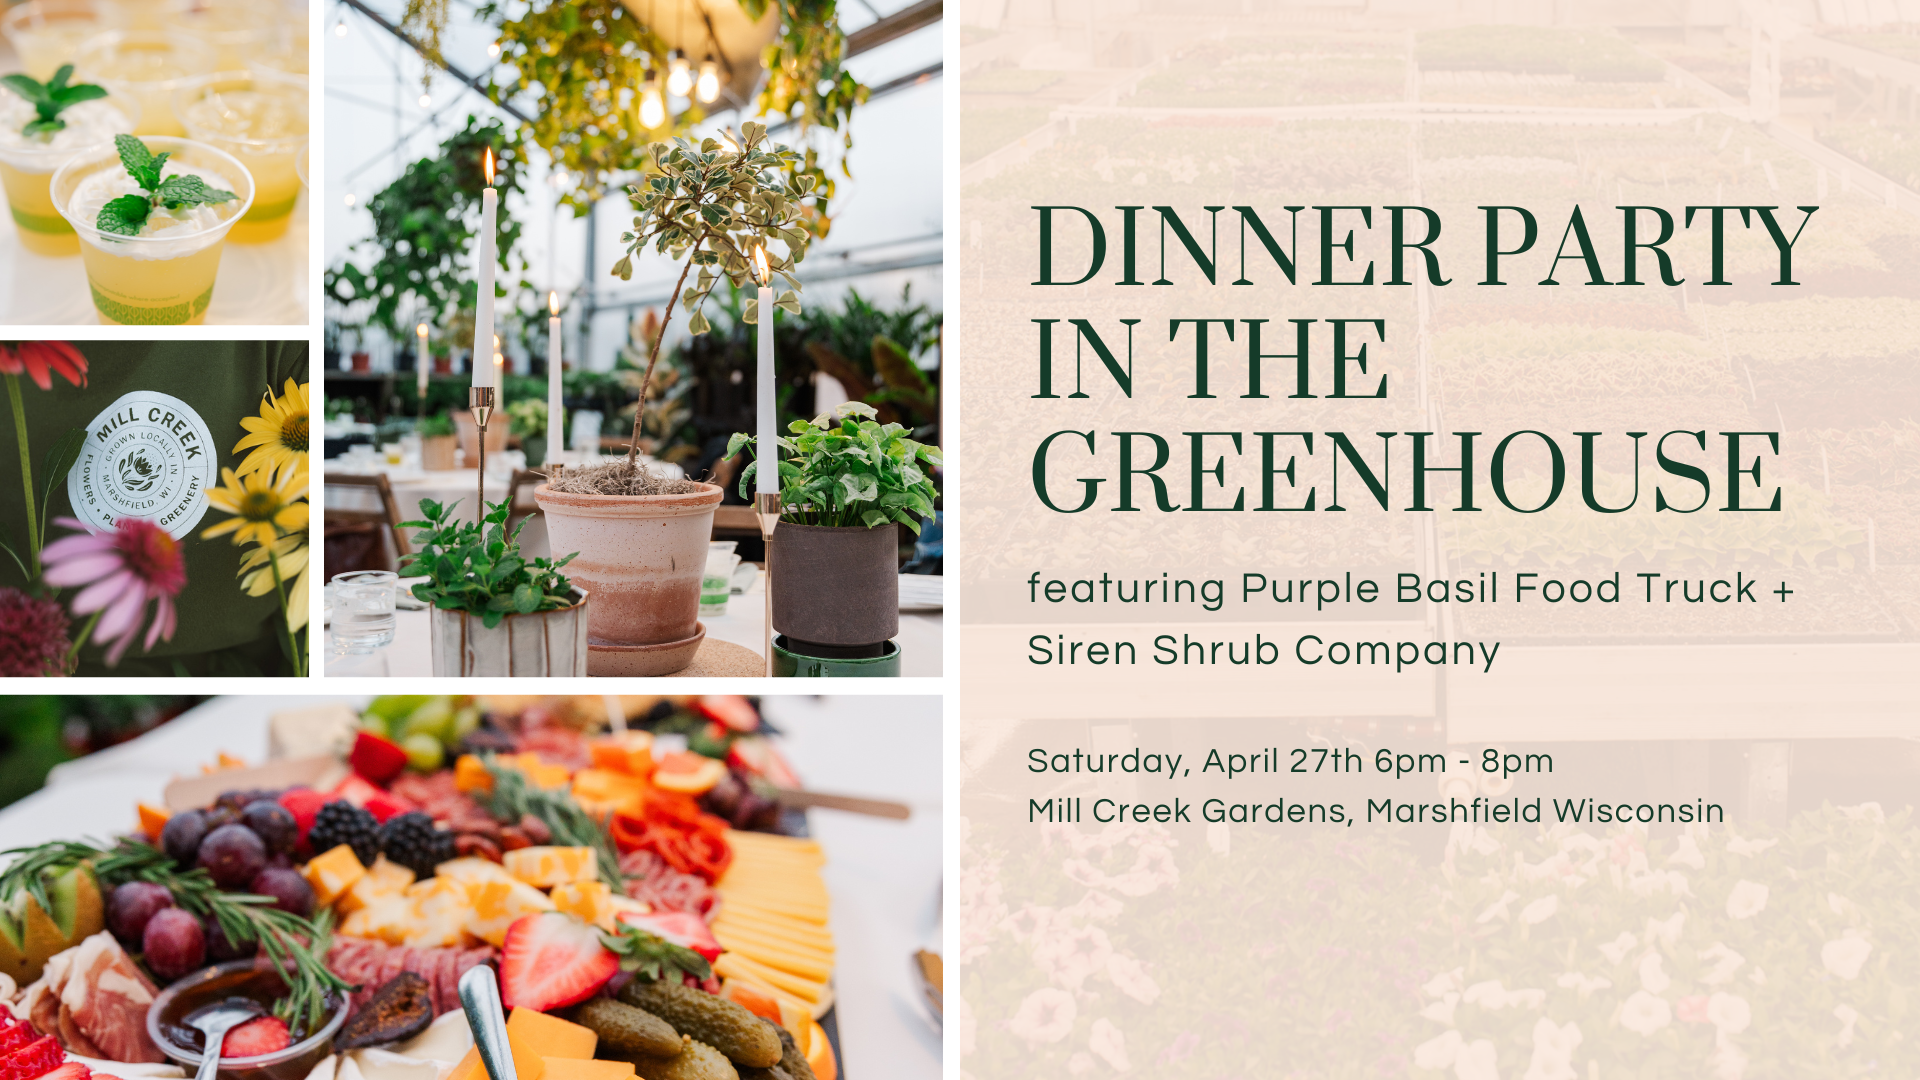 Dinner Party in the Greenhouse